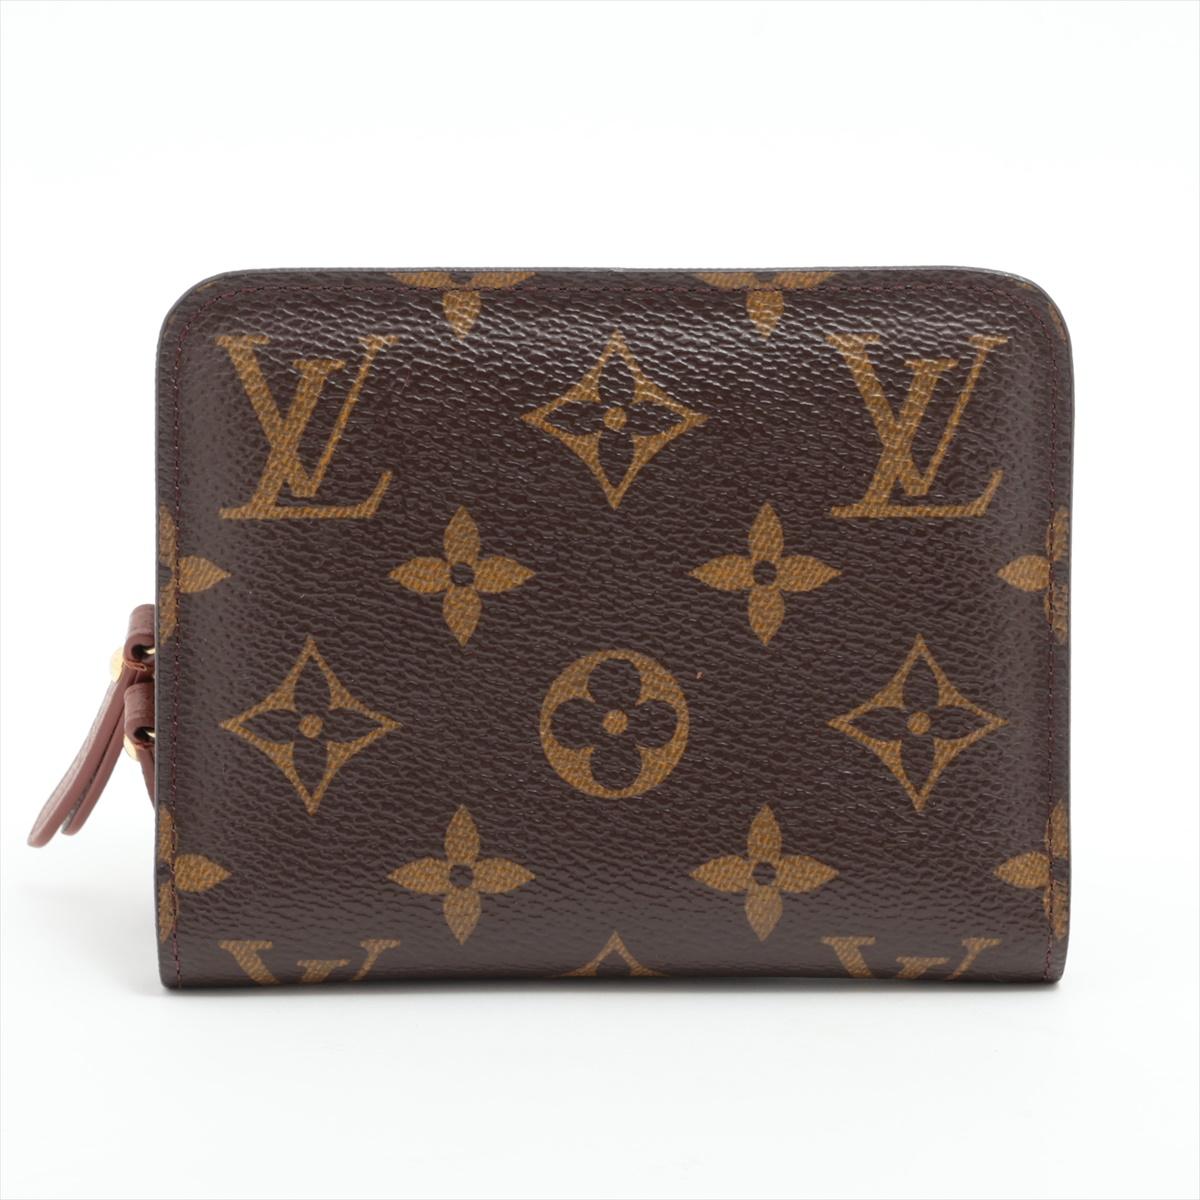 Louis Vuitton Monogram Insolite Bi fold Short Wallet In Good Condition For Sale In Indianapolis, IN